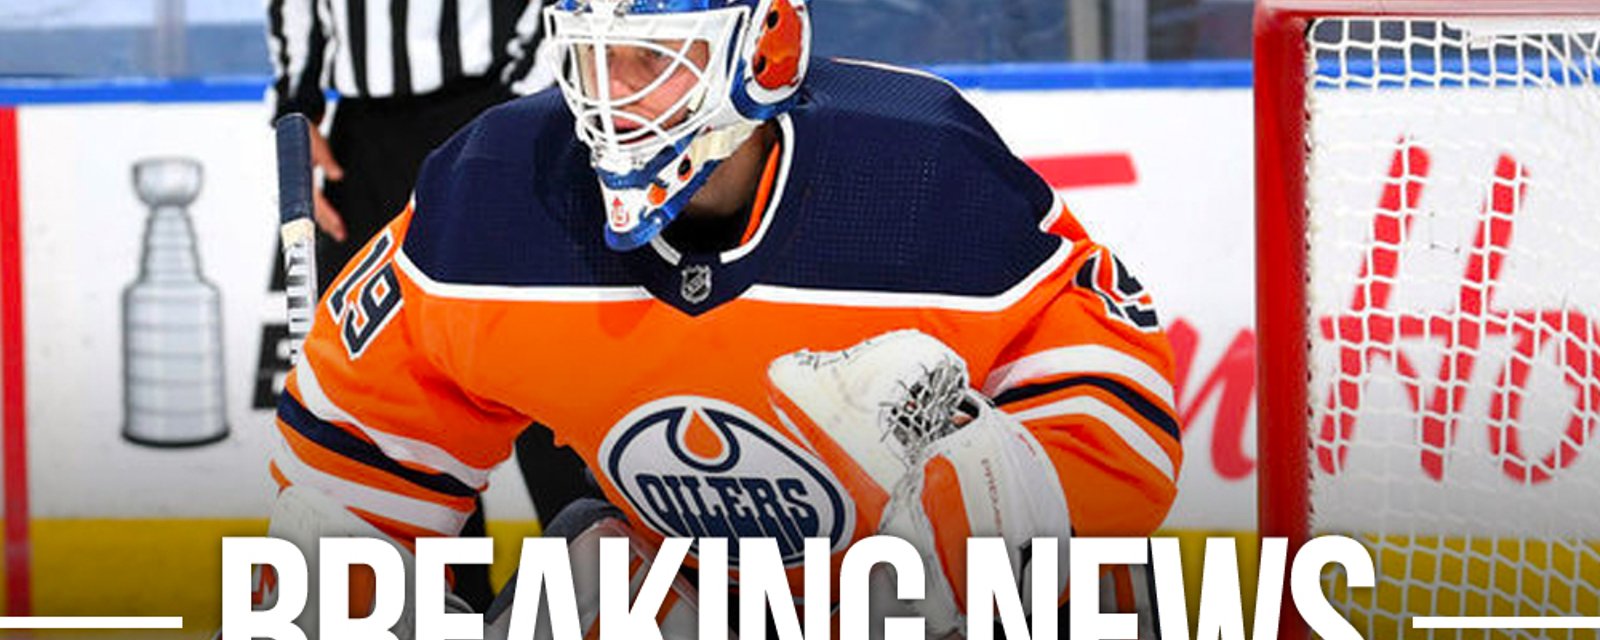 NHL won't let Koskinen play, Oilers forced to use emergency call up